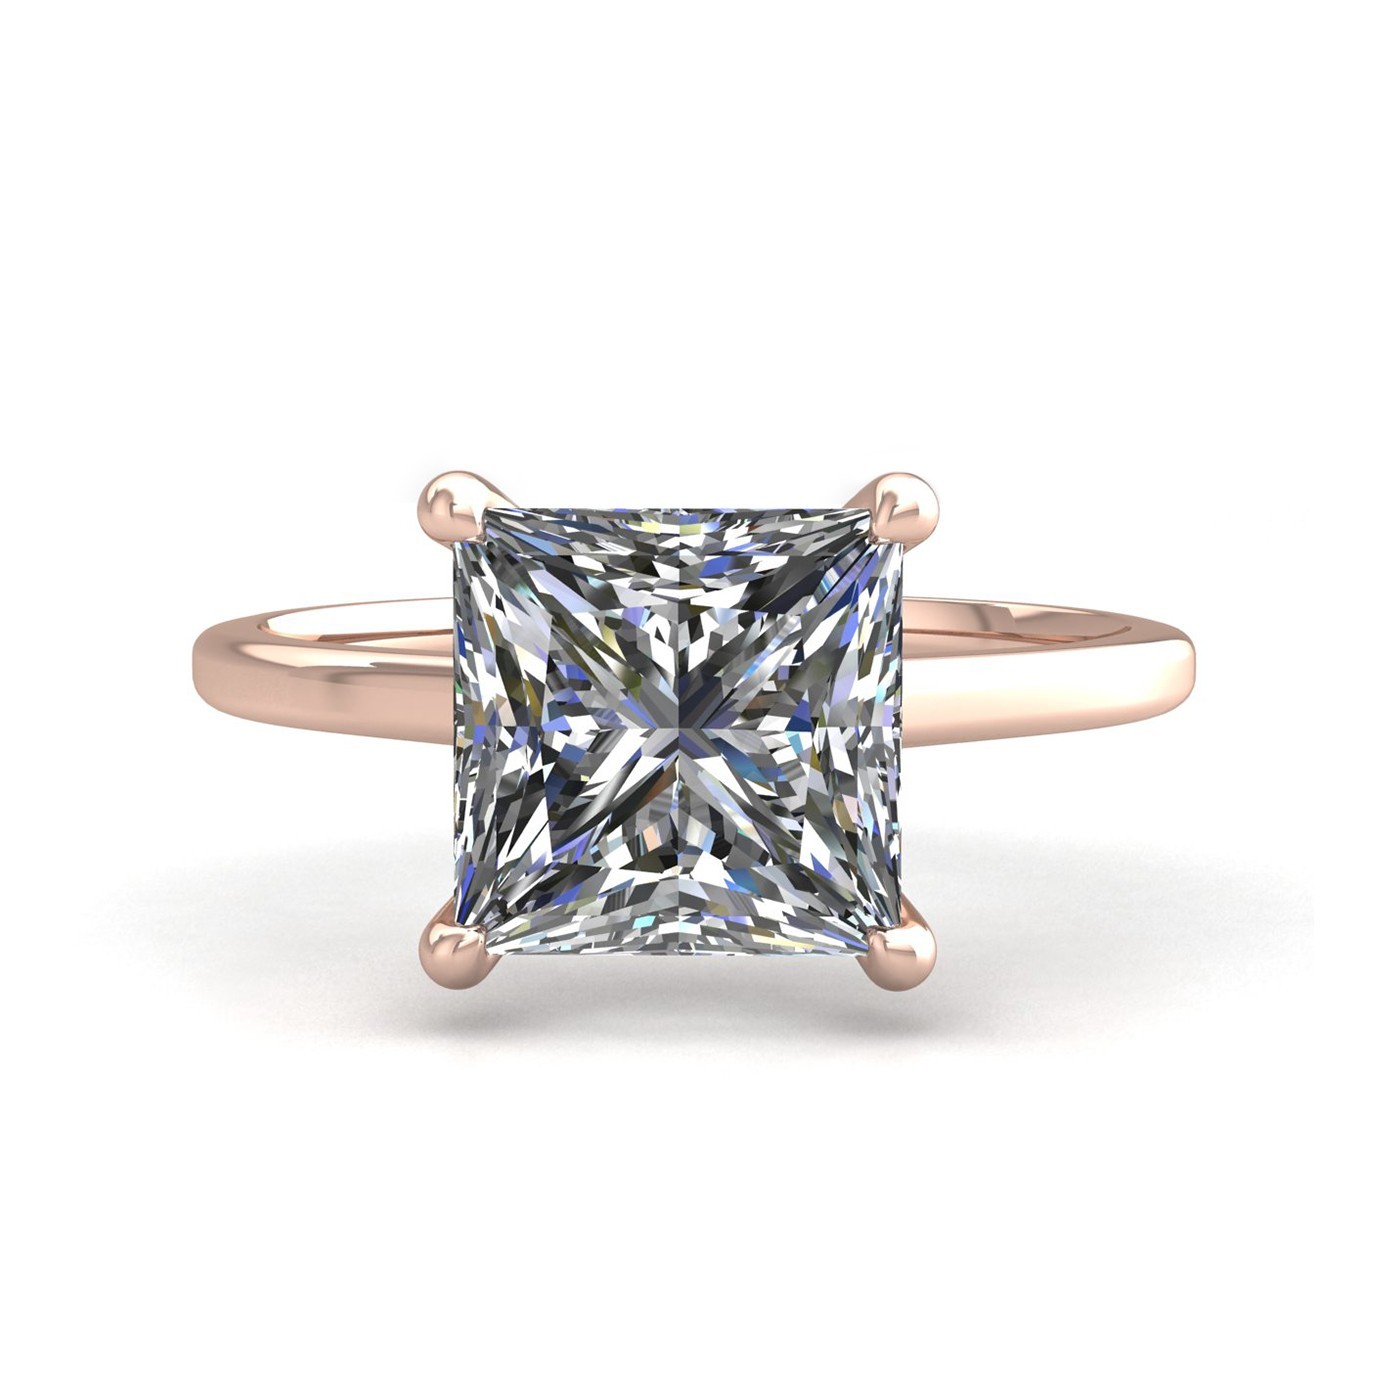 18k rose gold  2,50 ct 4 prongs solitaire princess cut diamond engagement ring with whisper thin band